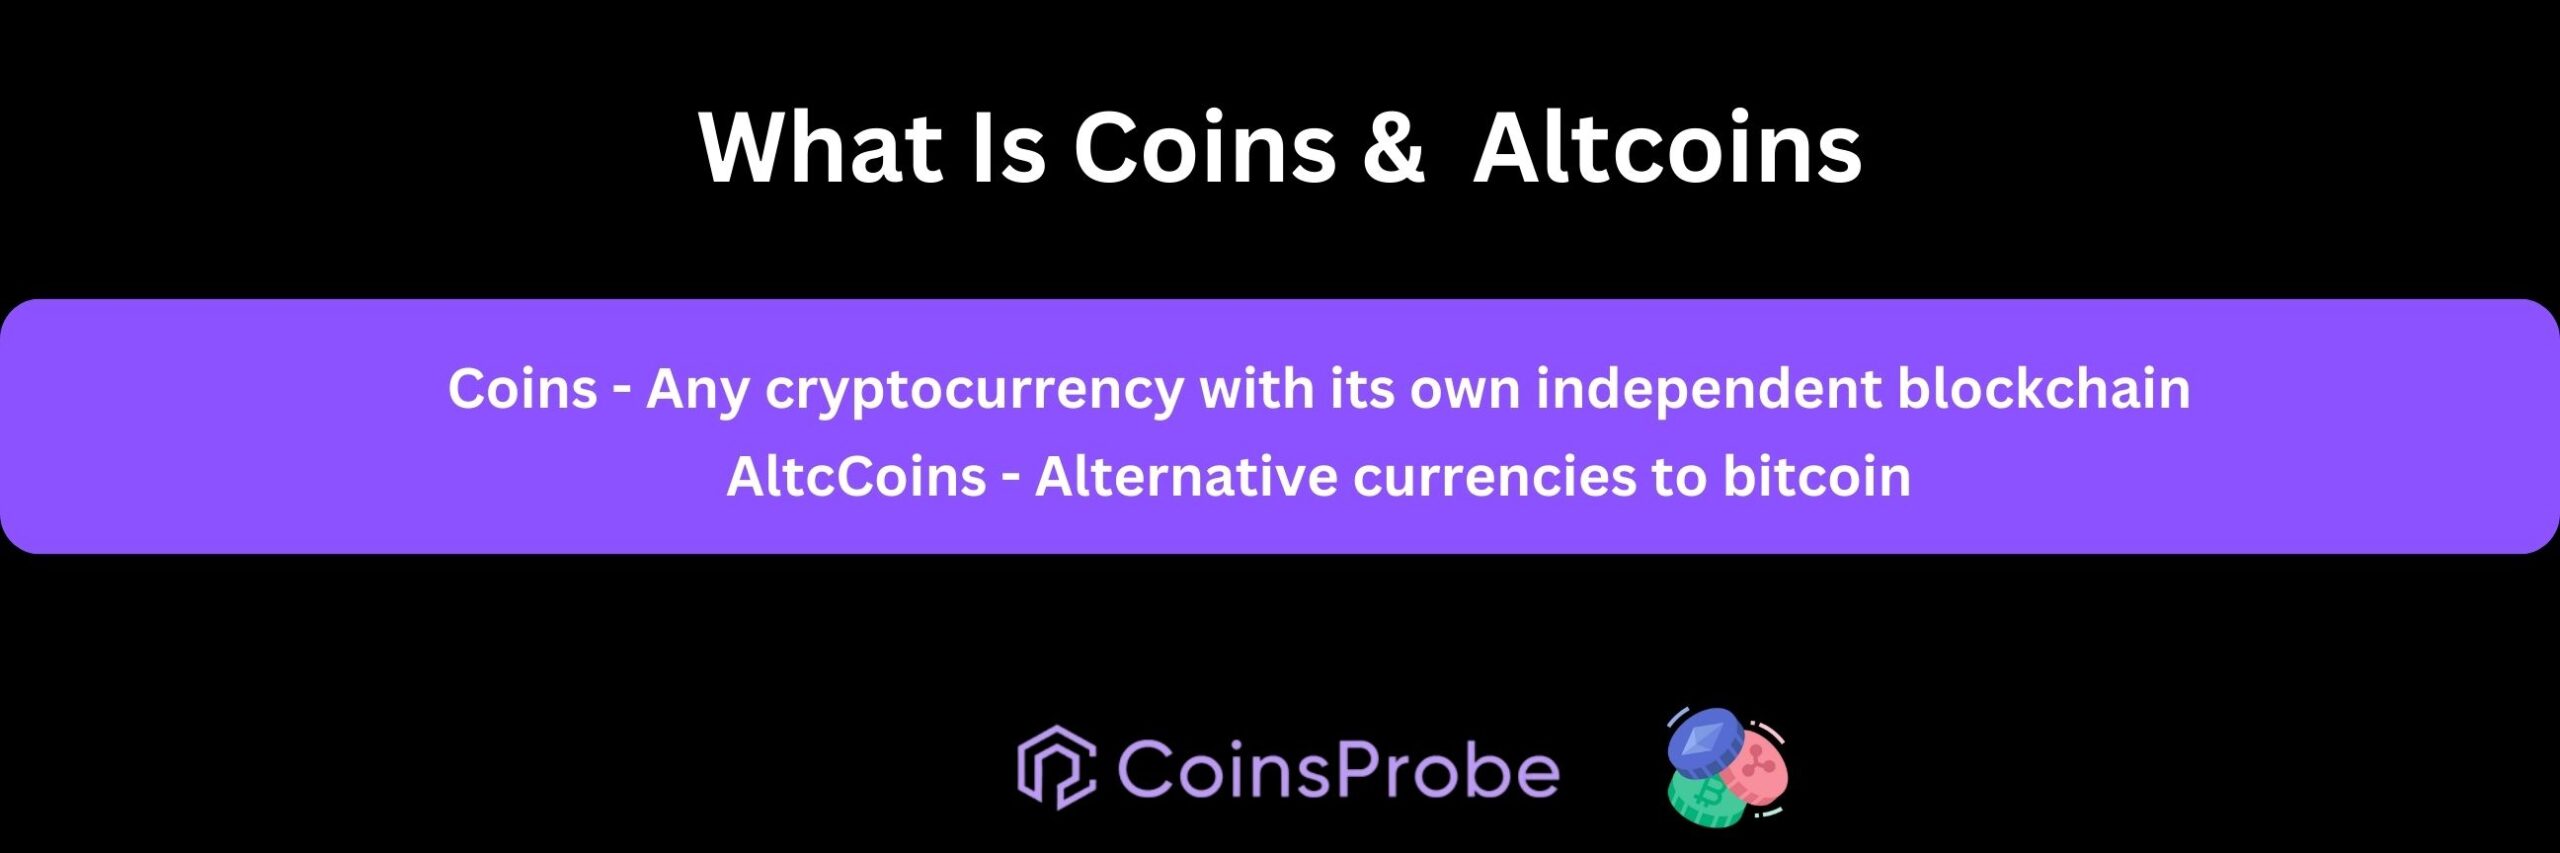 what is coins & altcoins